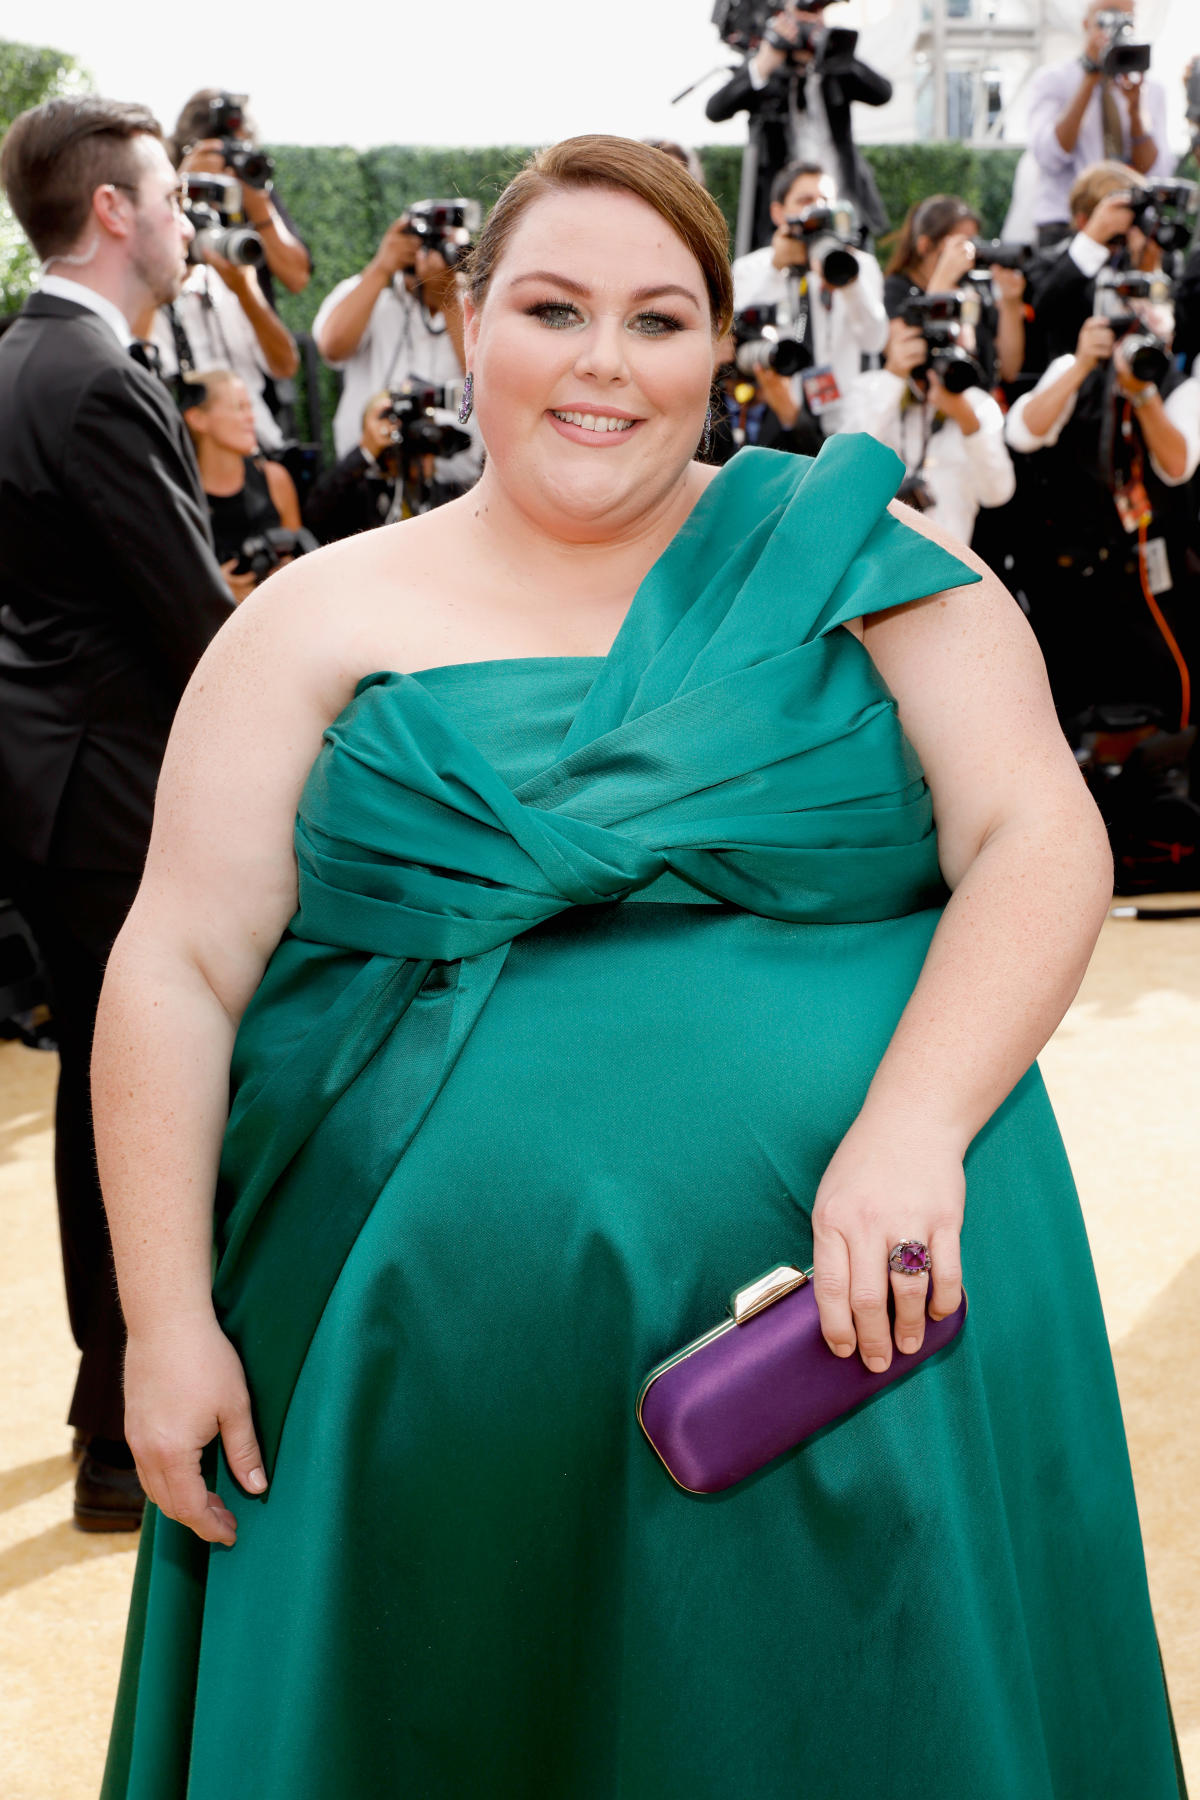 Chrissy Metz Says Getting Oscars-Ready as a Plus-Size Woman Is A